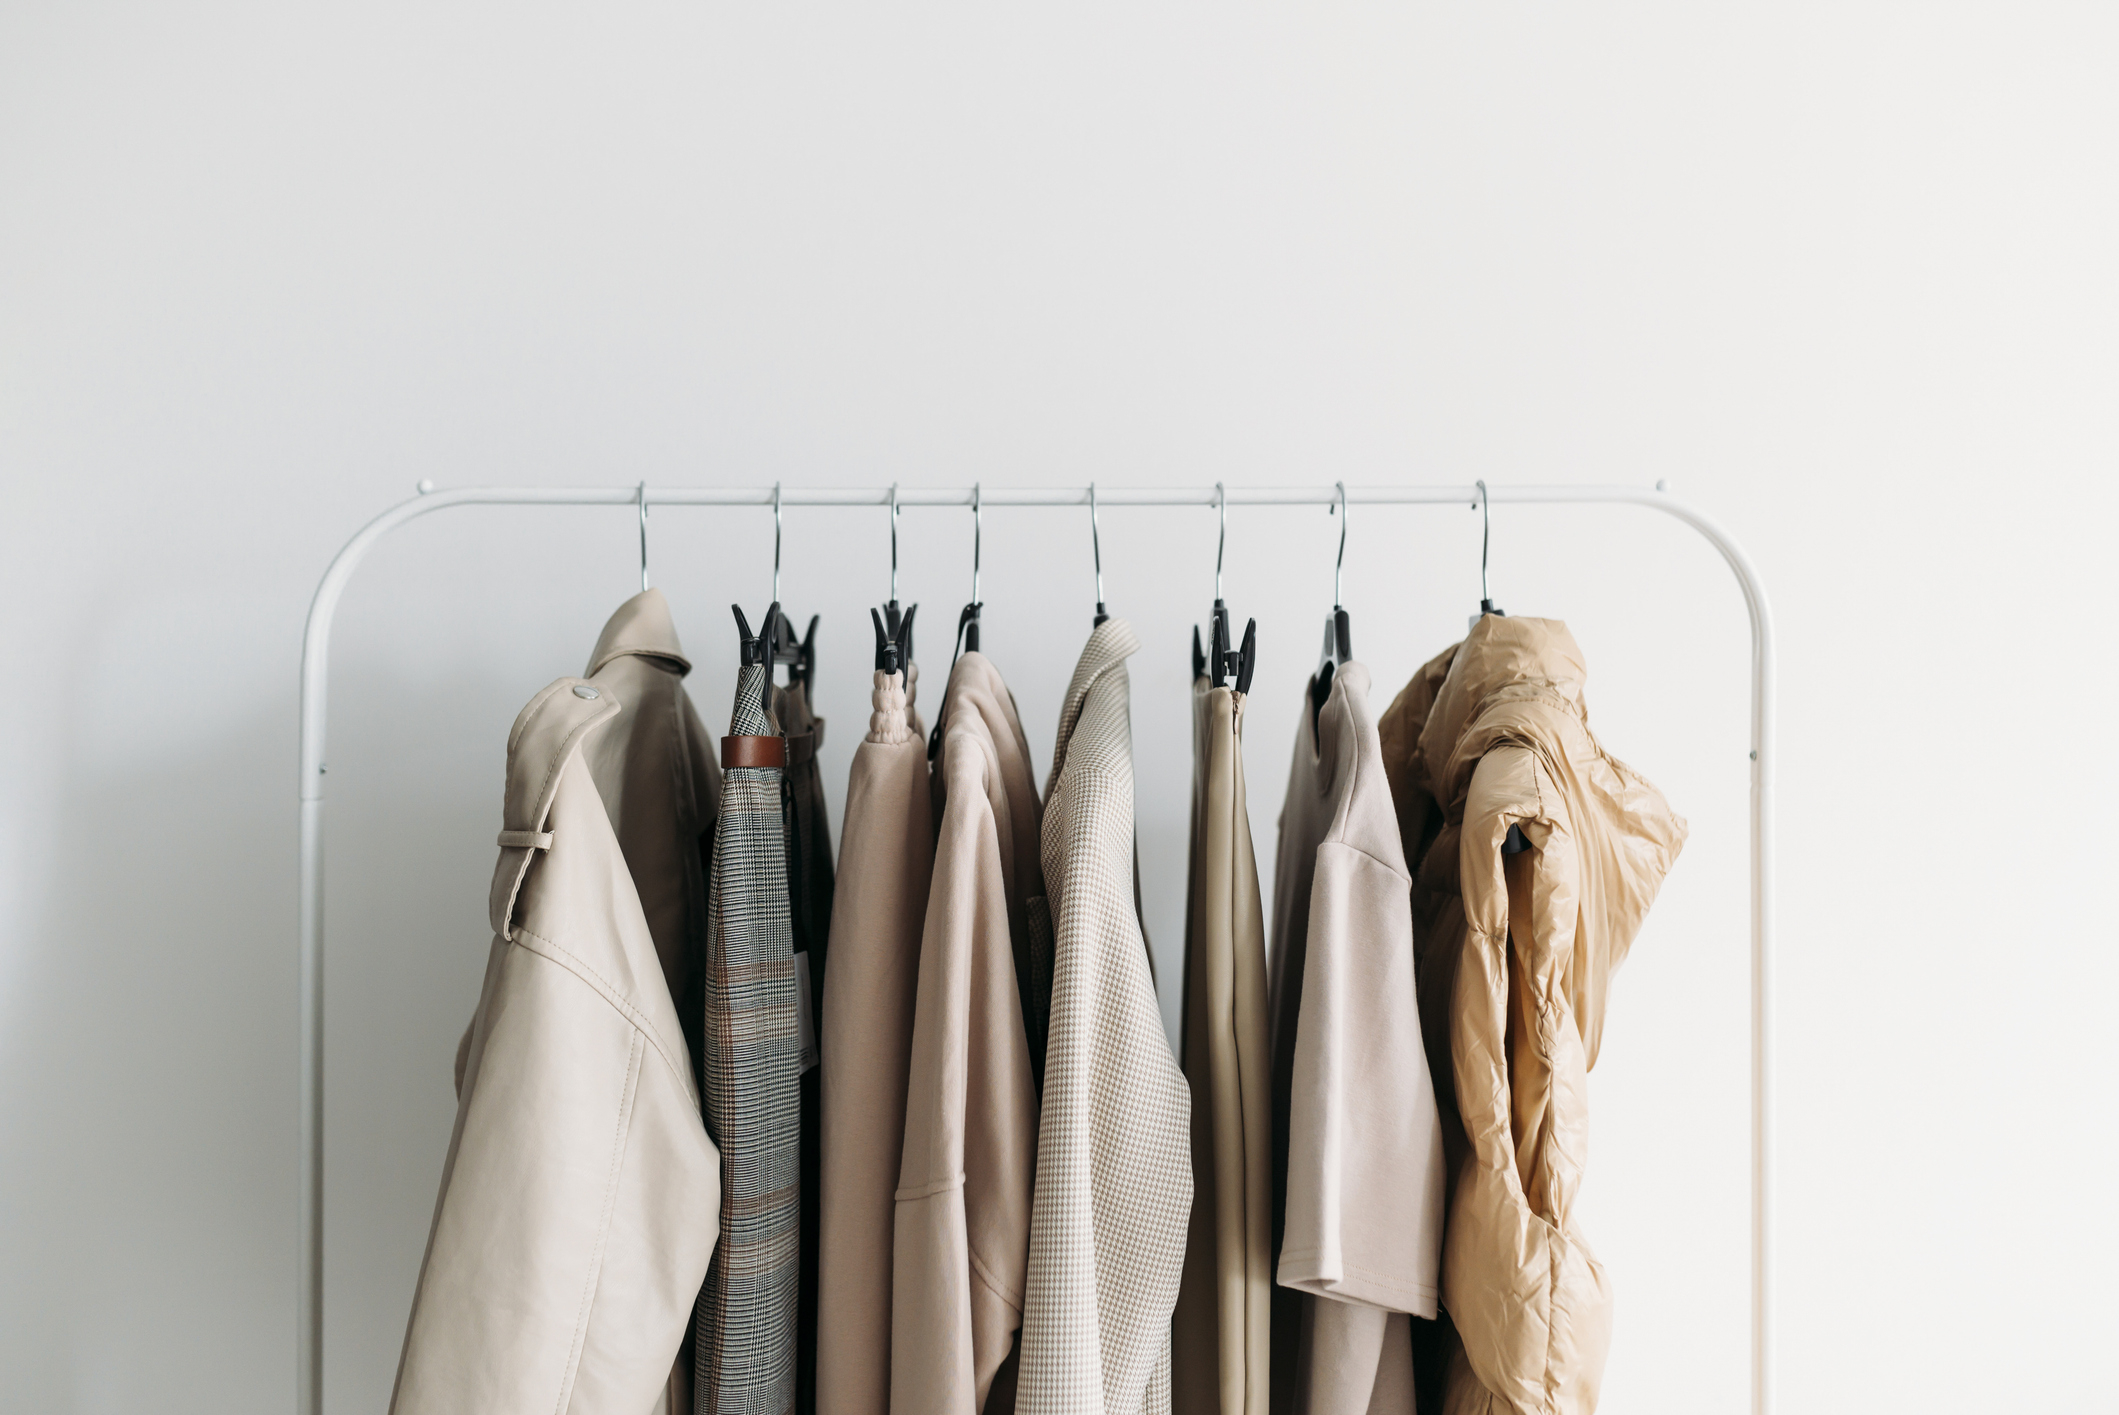 A clothing rack with various neutral-toned jackets and coats neatly hung